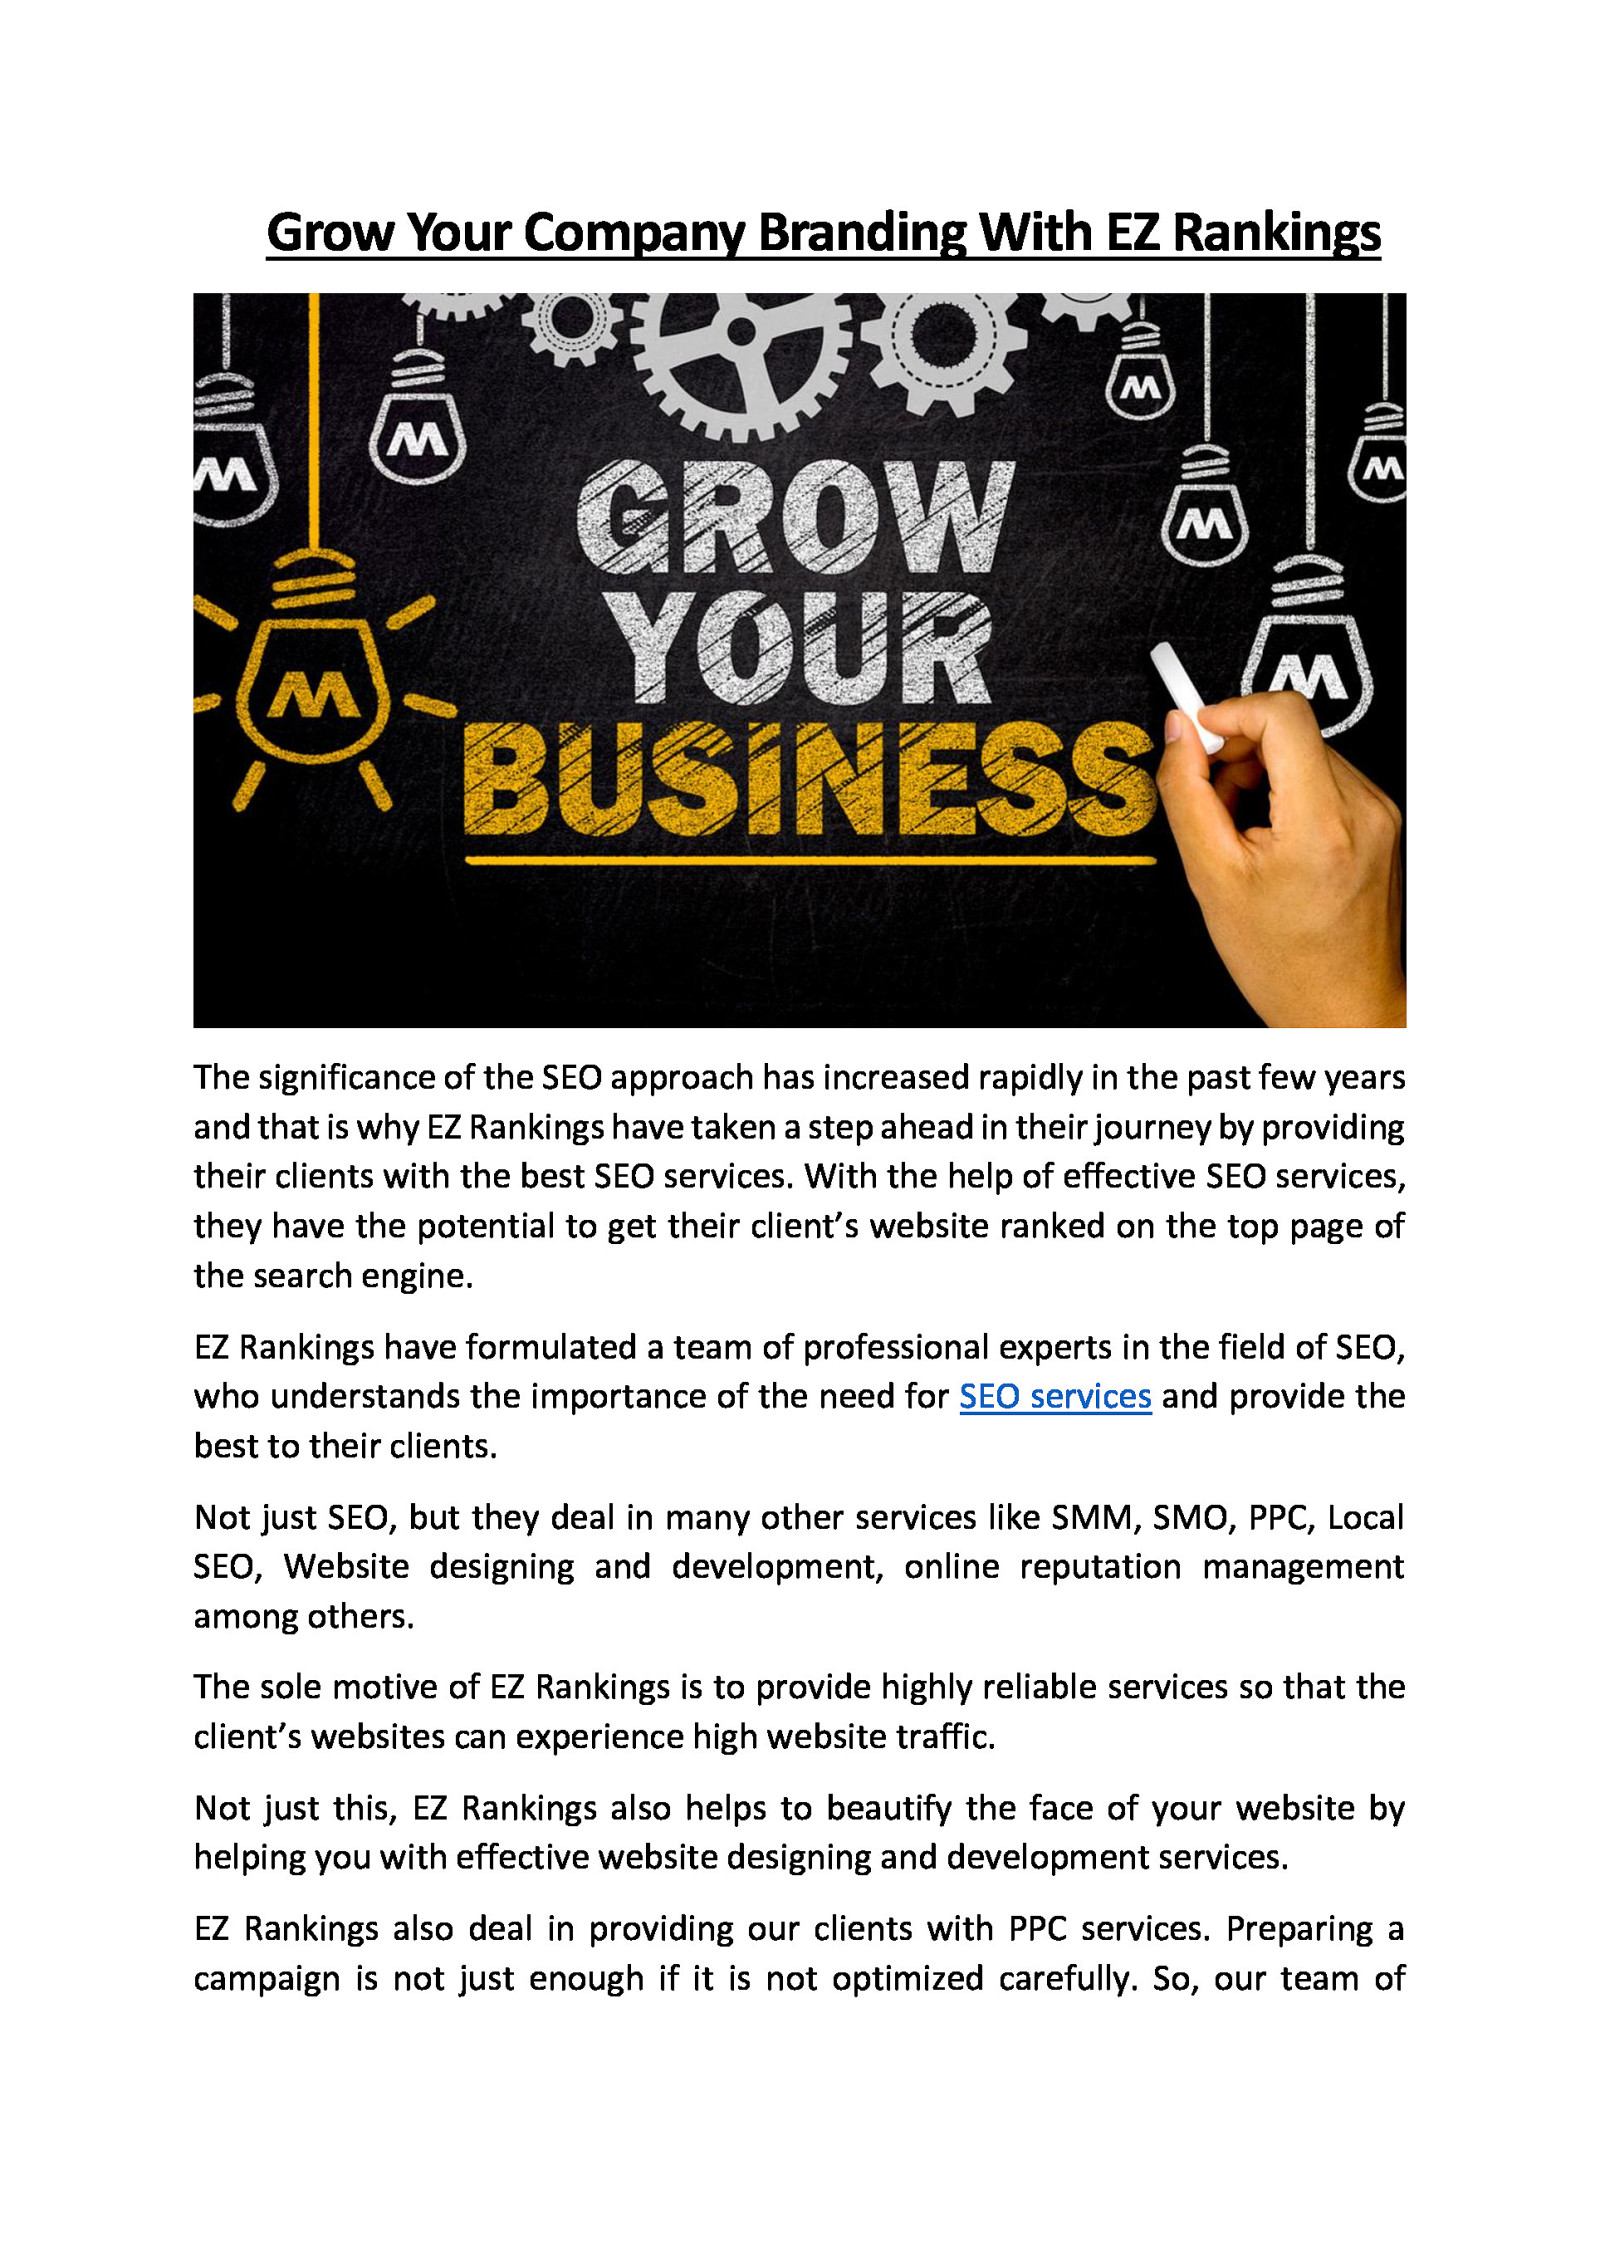 How to grow your business by Rowan Martin